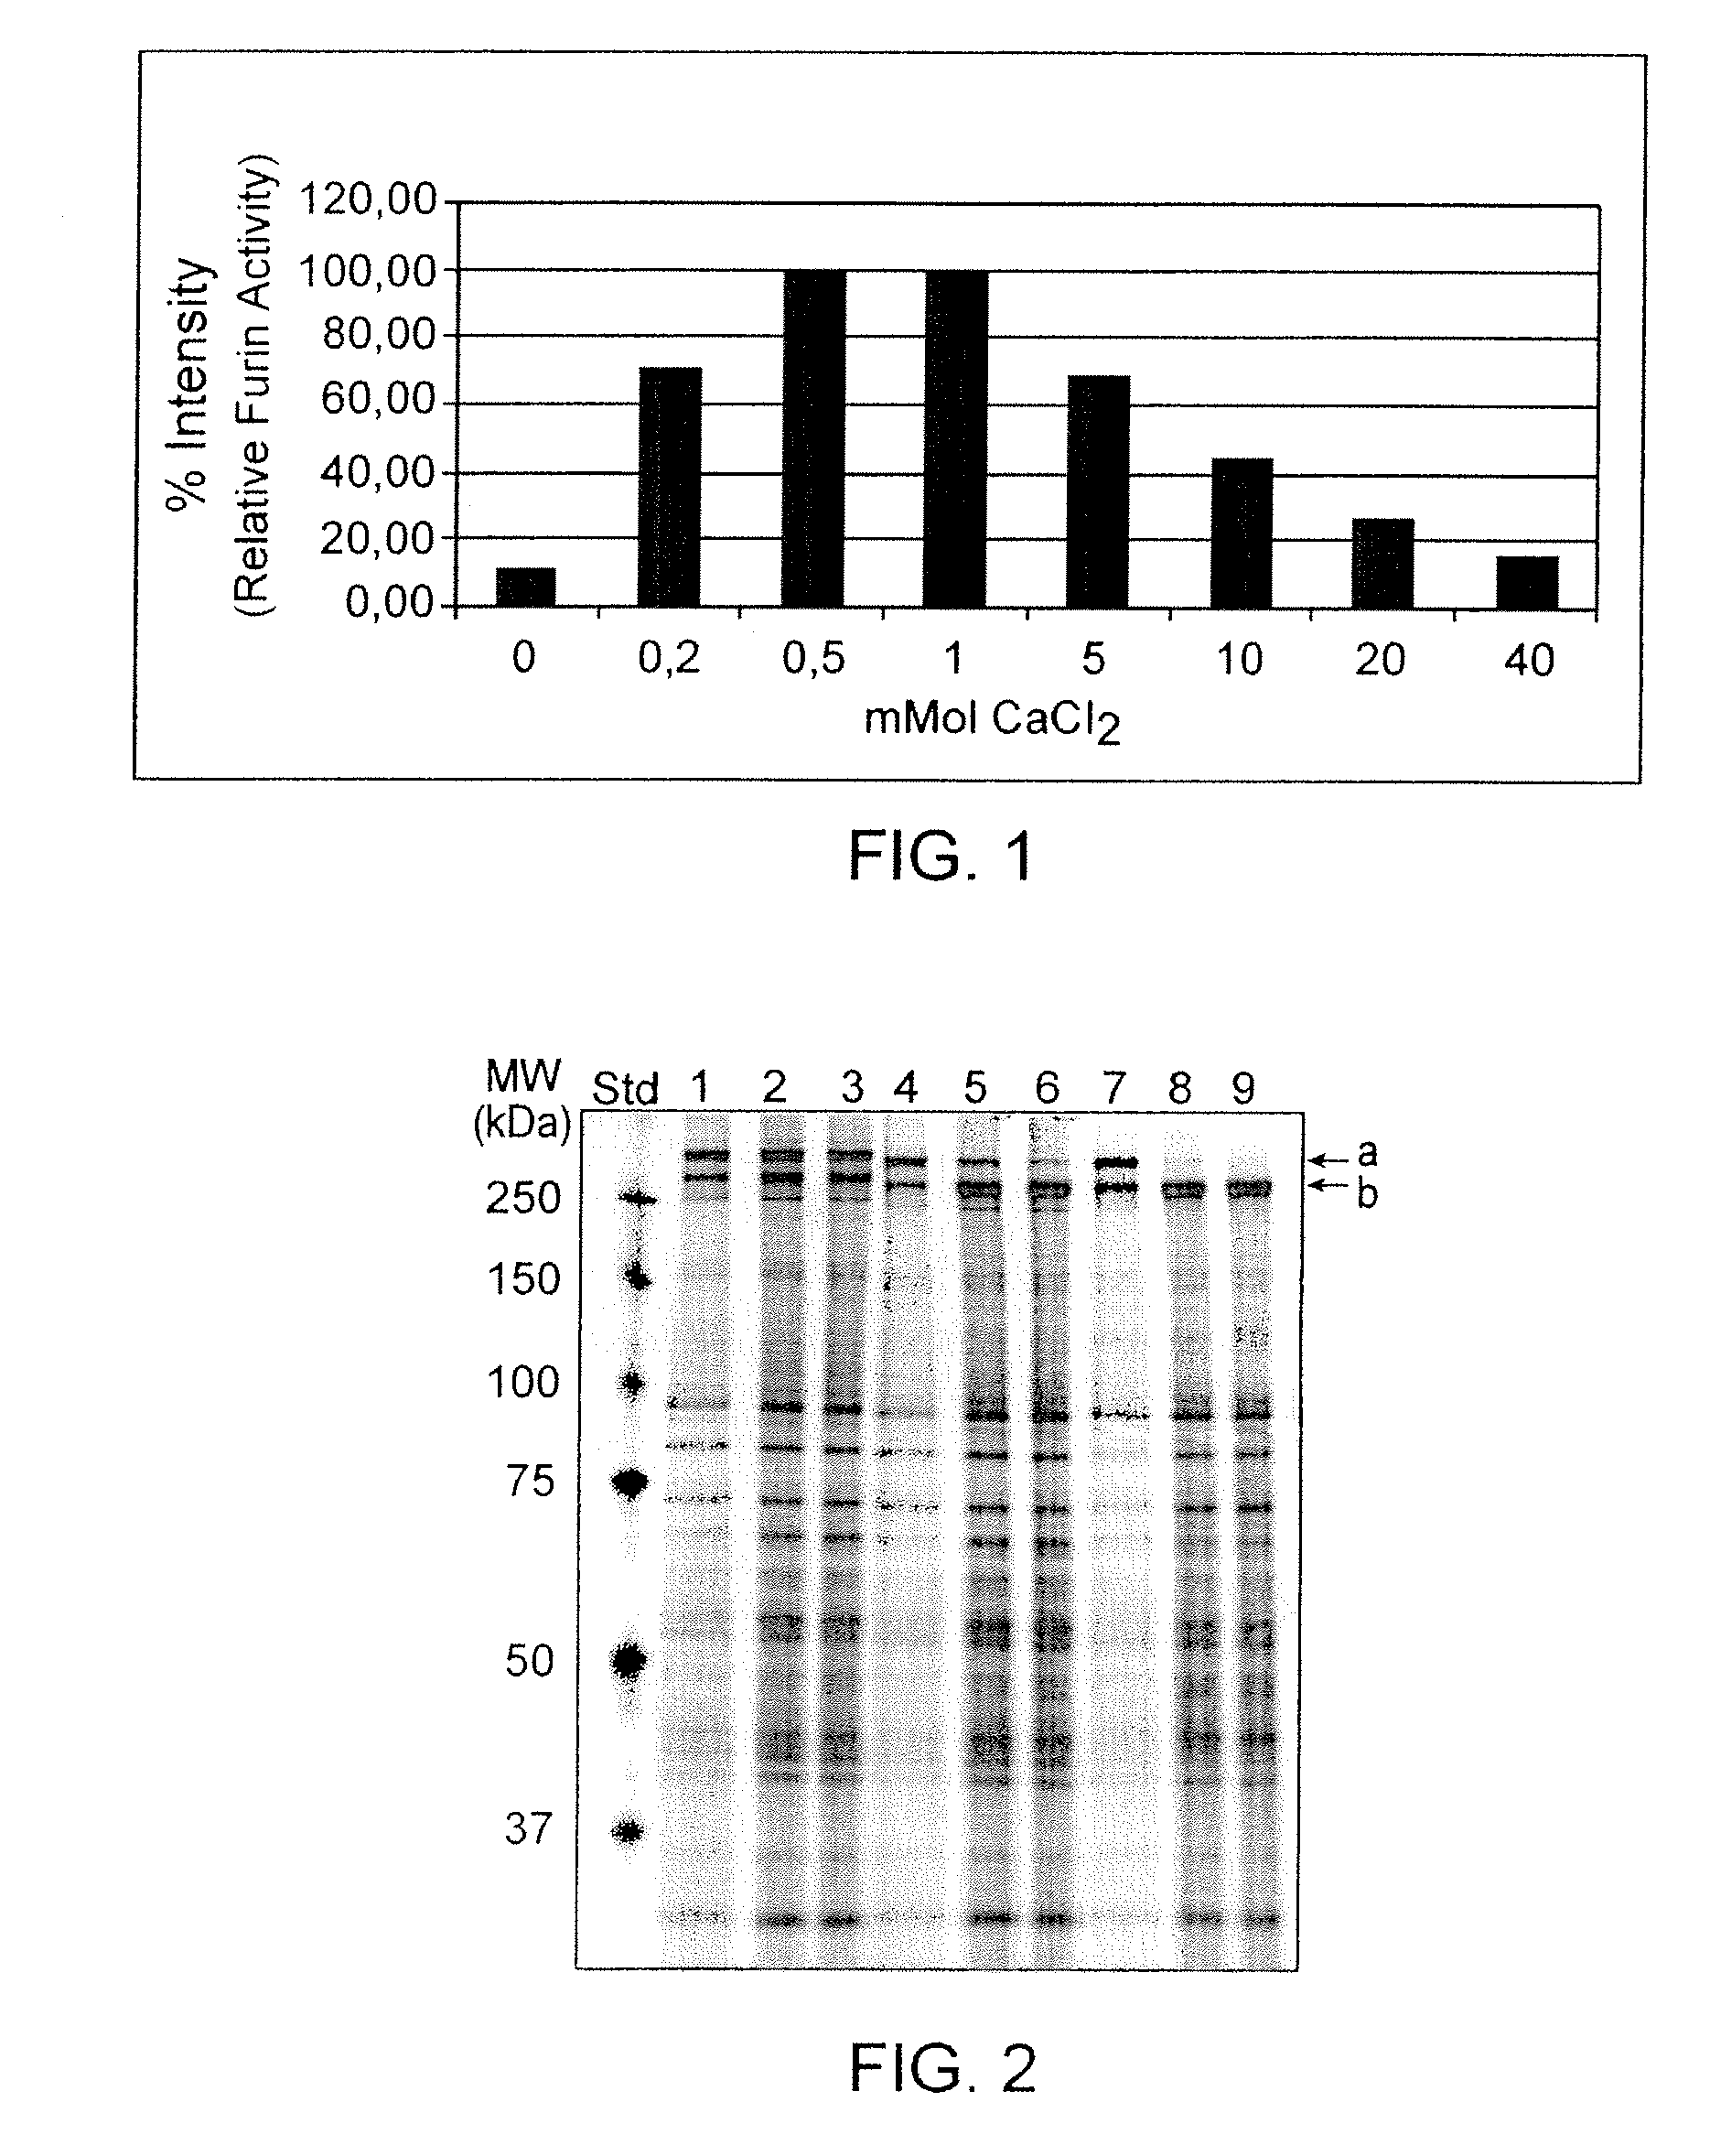 Method for producing mature VWF from VWF pro-peptide